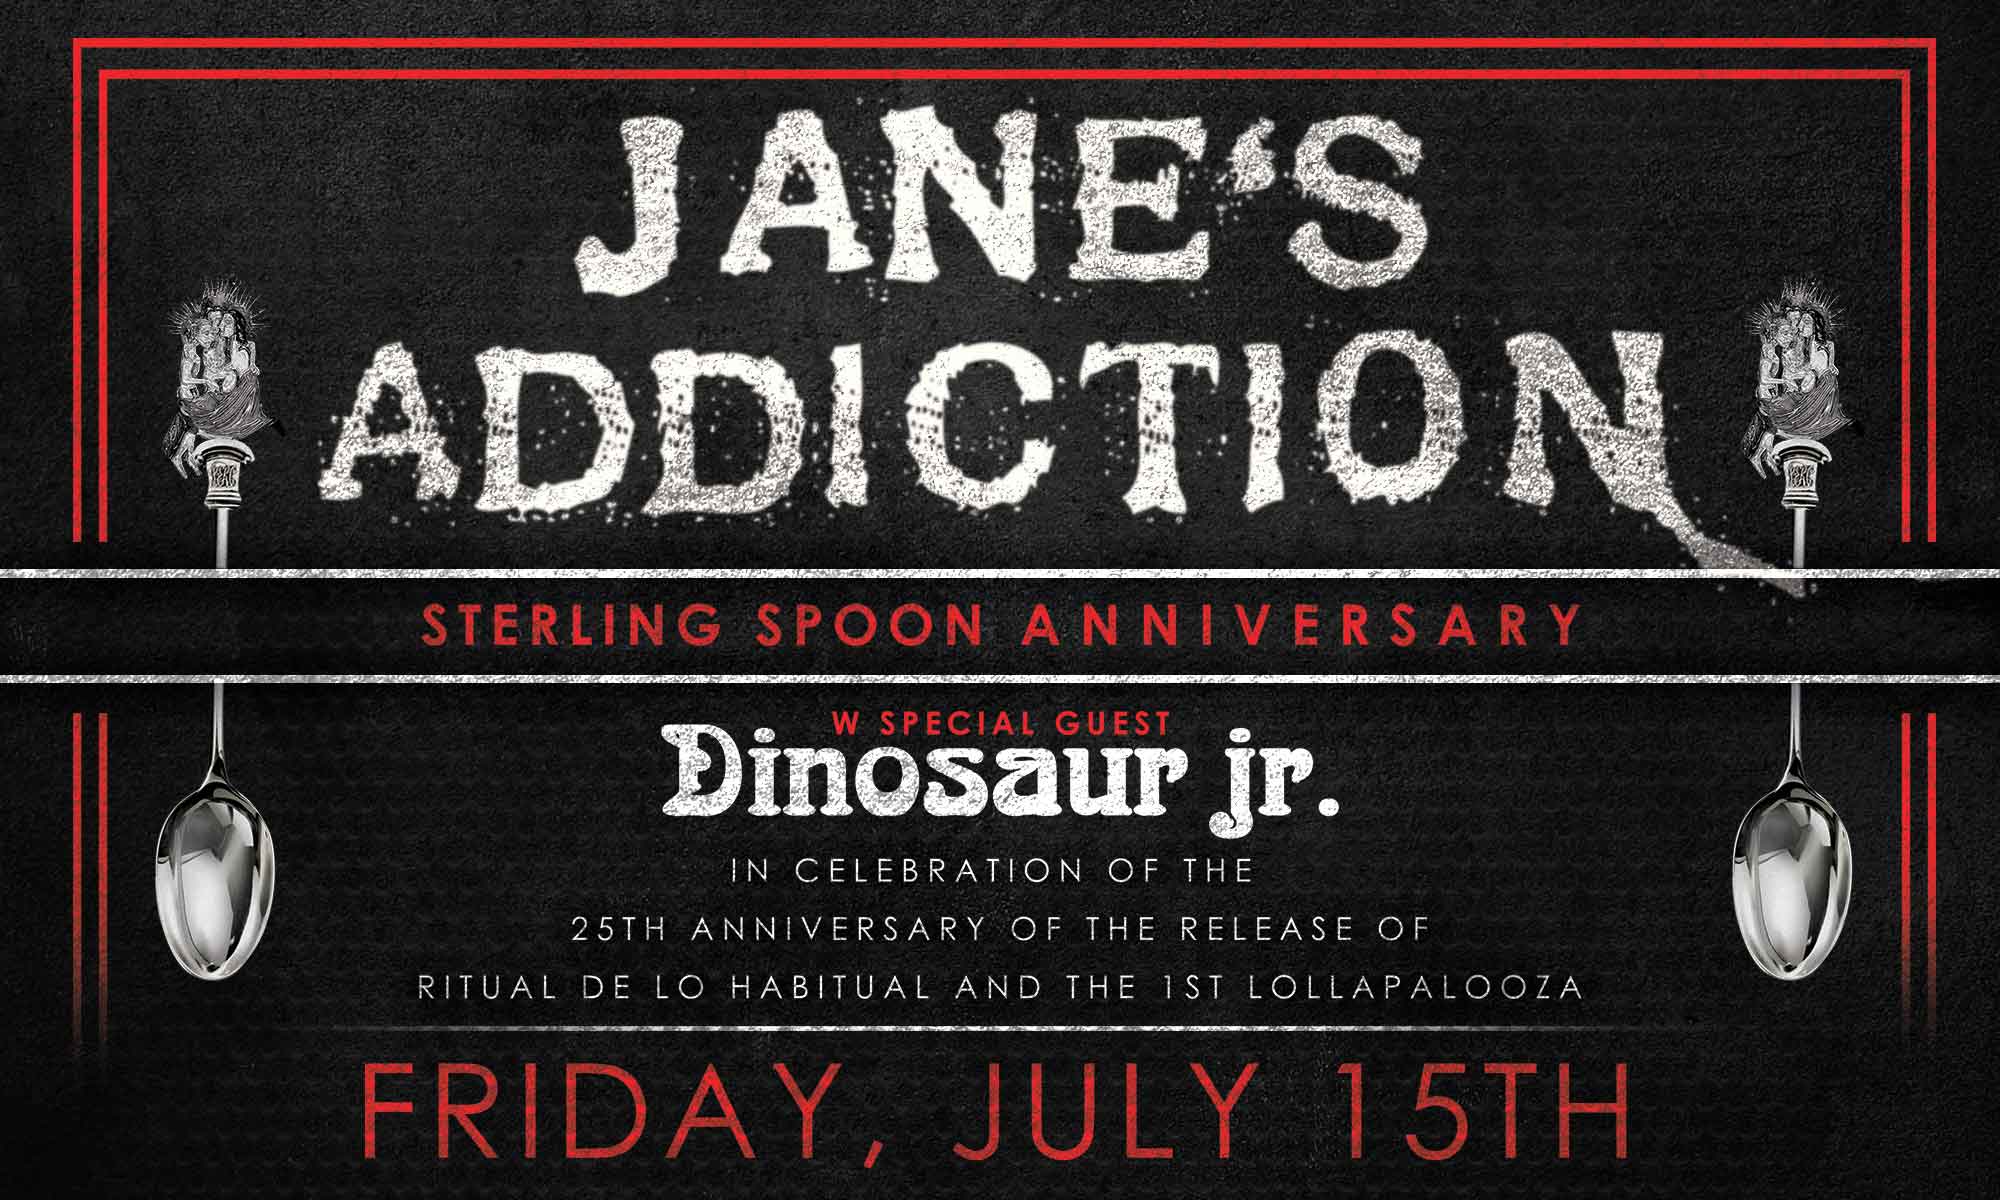 Jane's Addiction - Sterling Spoon Anniversary at Coney Island Amphitheater on 07-15-16